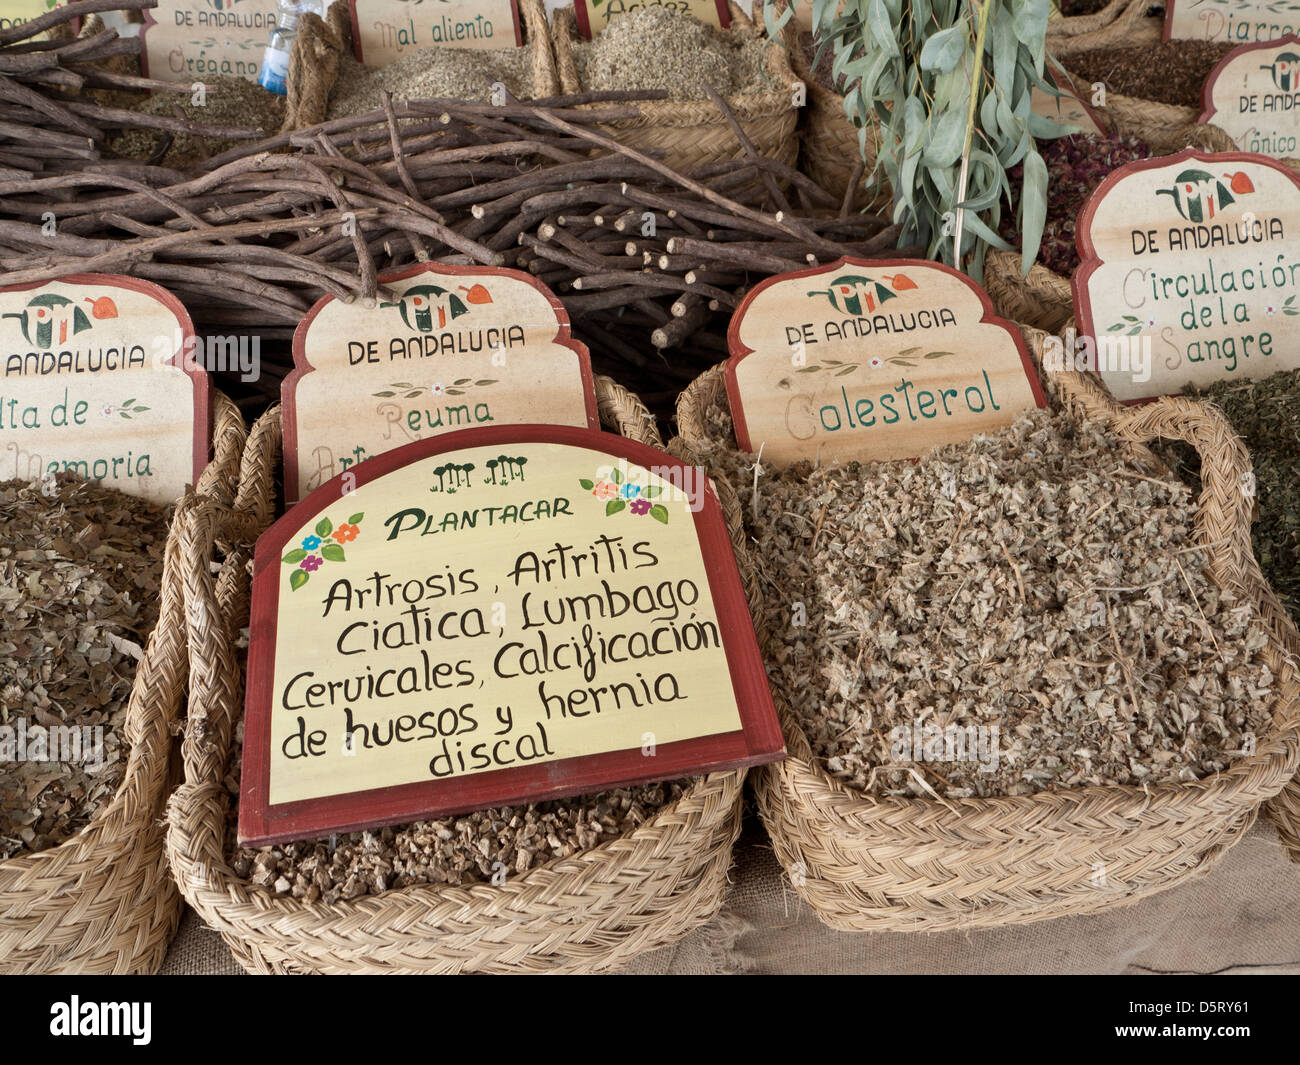 PALMA MARKET Variety of herbs herbal medicinal curative remedies on display for sale Palma de Mallorca market stall  Spain Stock Photo